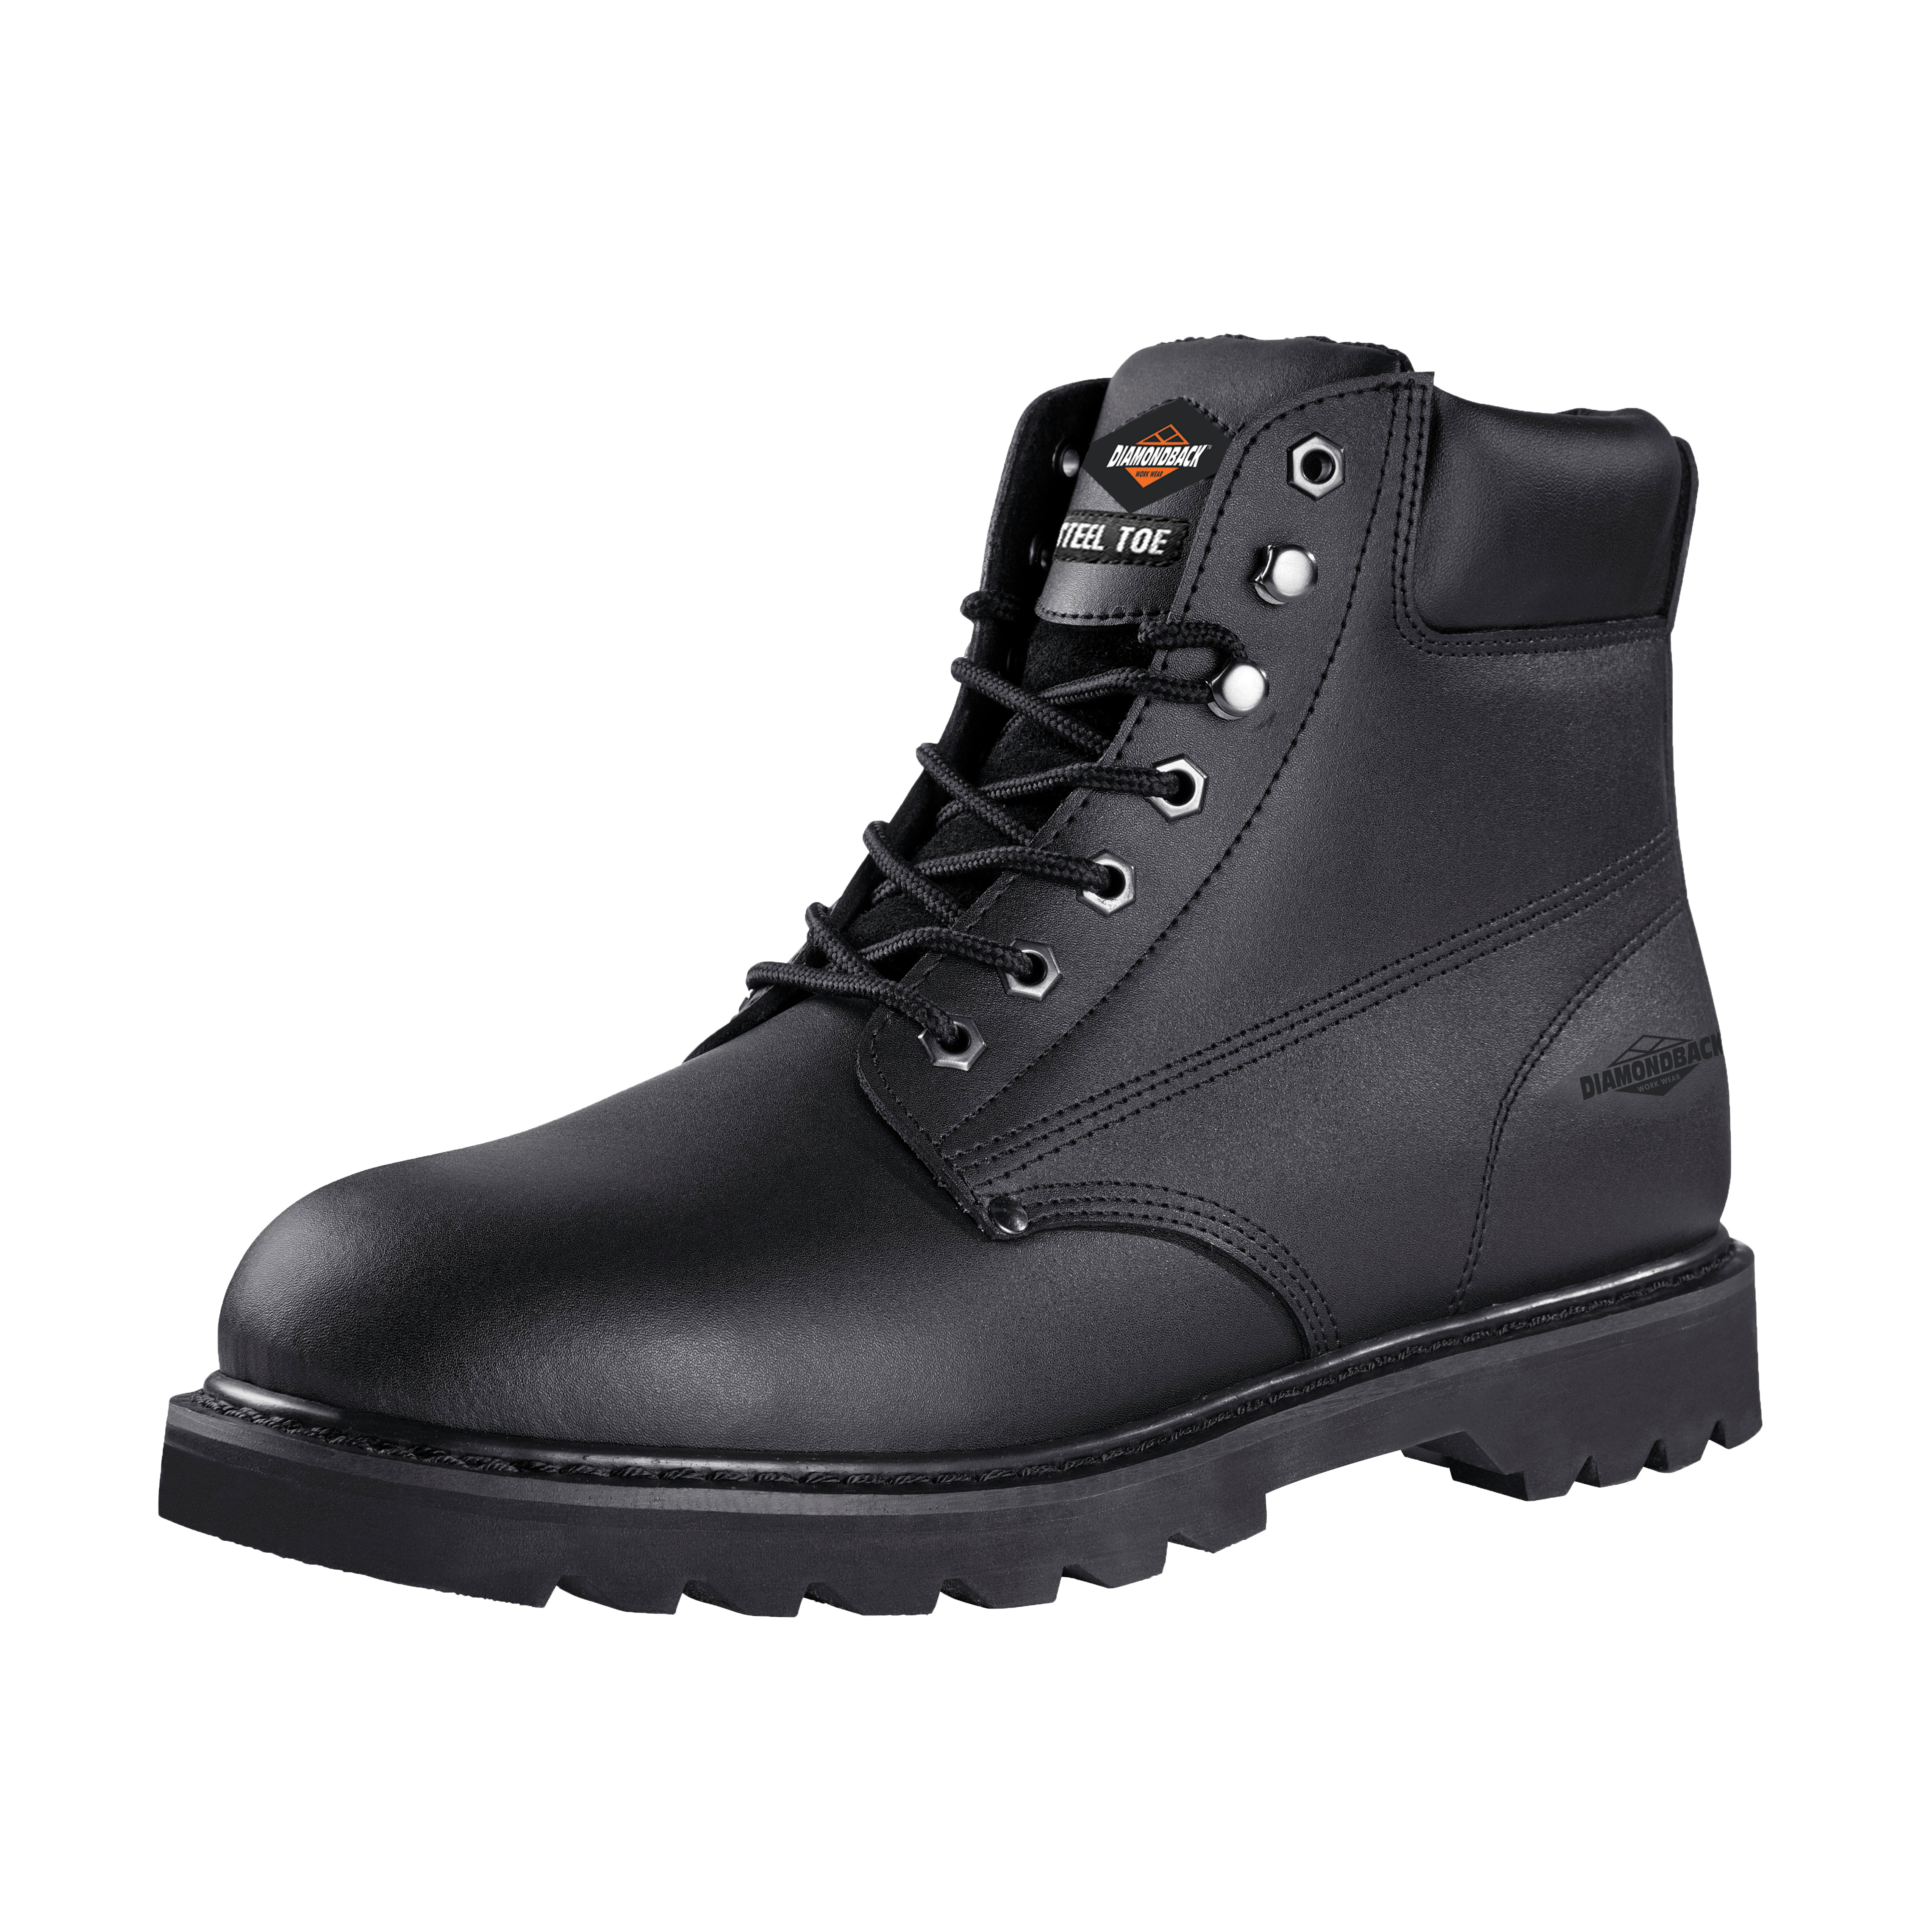 Work Boots, 10, Medium W, Black, Leather Upper, Lace-Up, Steel Toe, With Lining